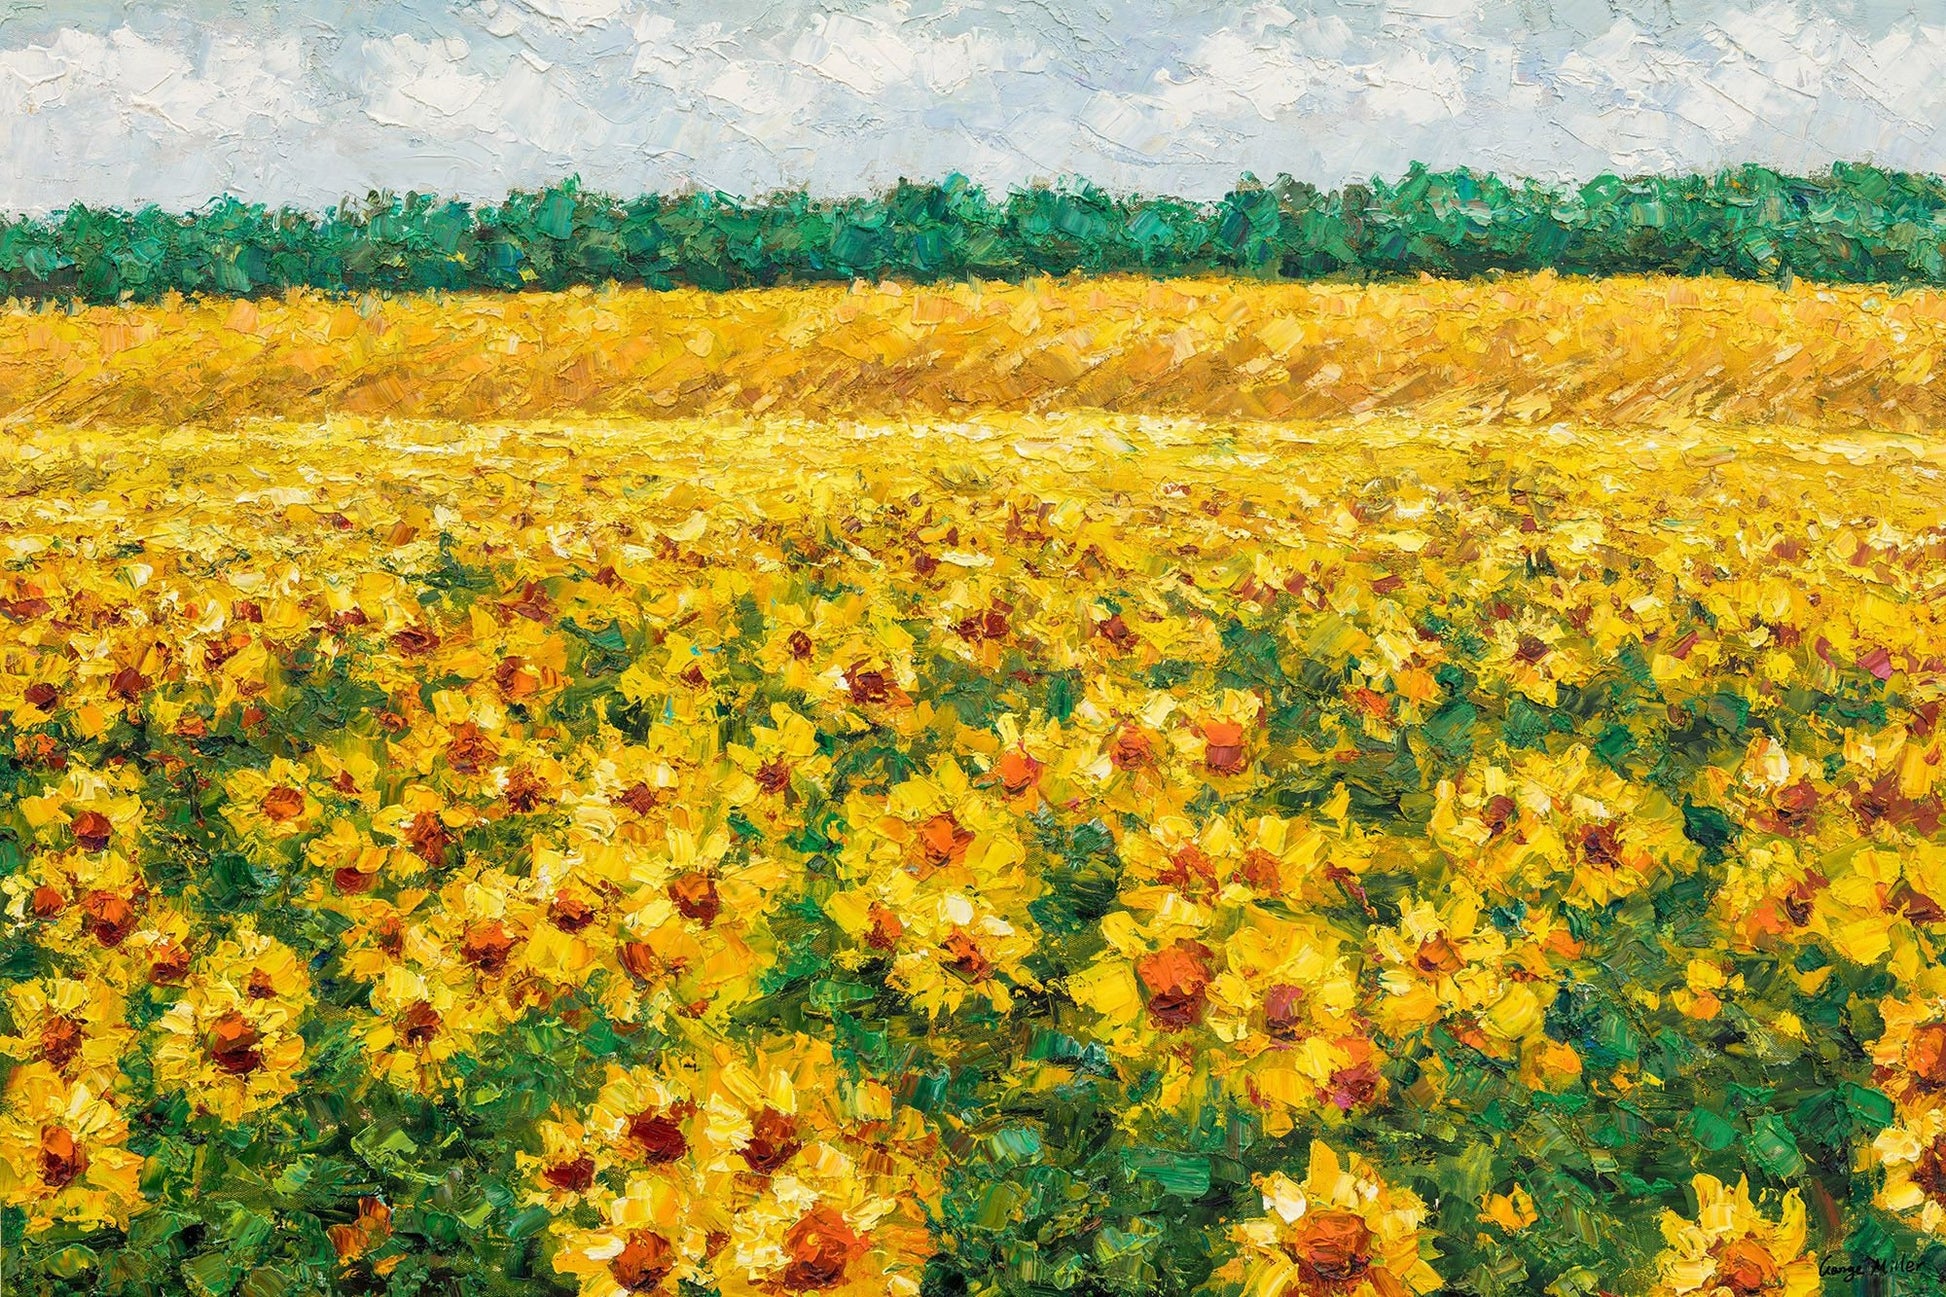 Sunflowers Field Oil Painting Landscape, Large Painting, Contemporary Wall Art, Original Abstract Painting, Landscape Painting, Canvas Art